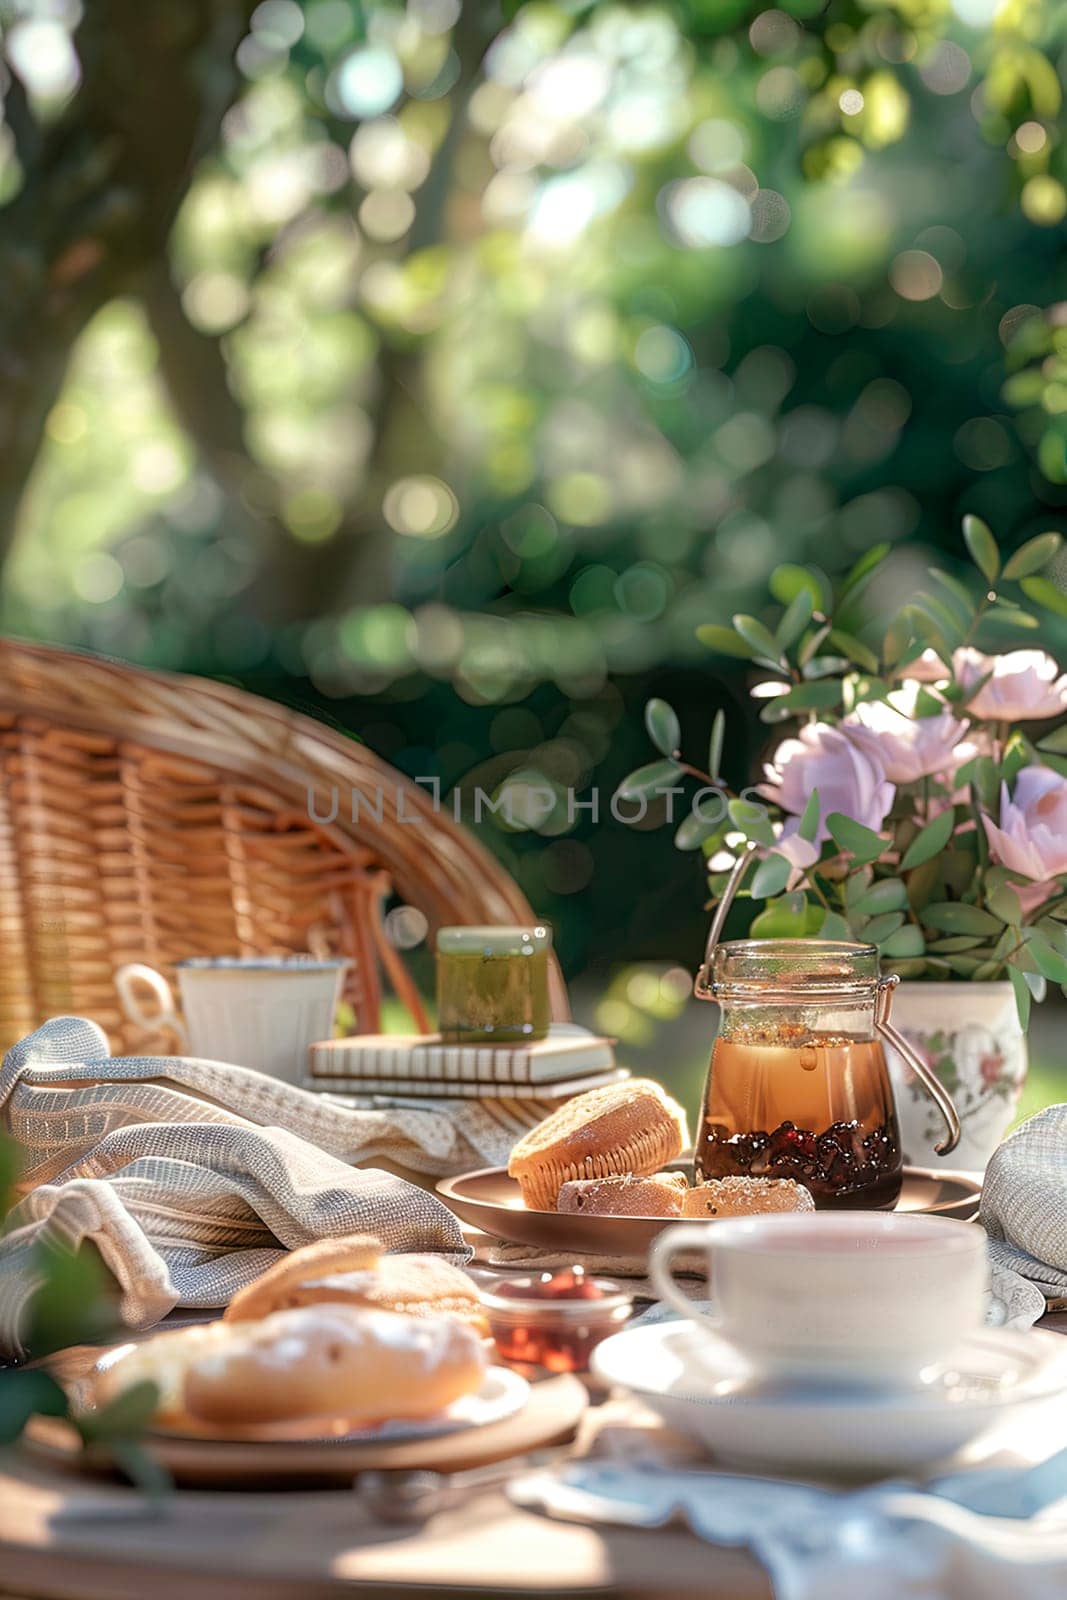 breakfast on the table in the garden. selective focus. food.